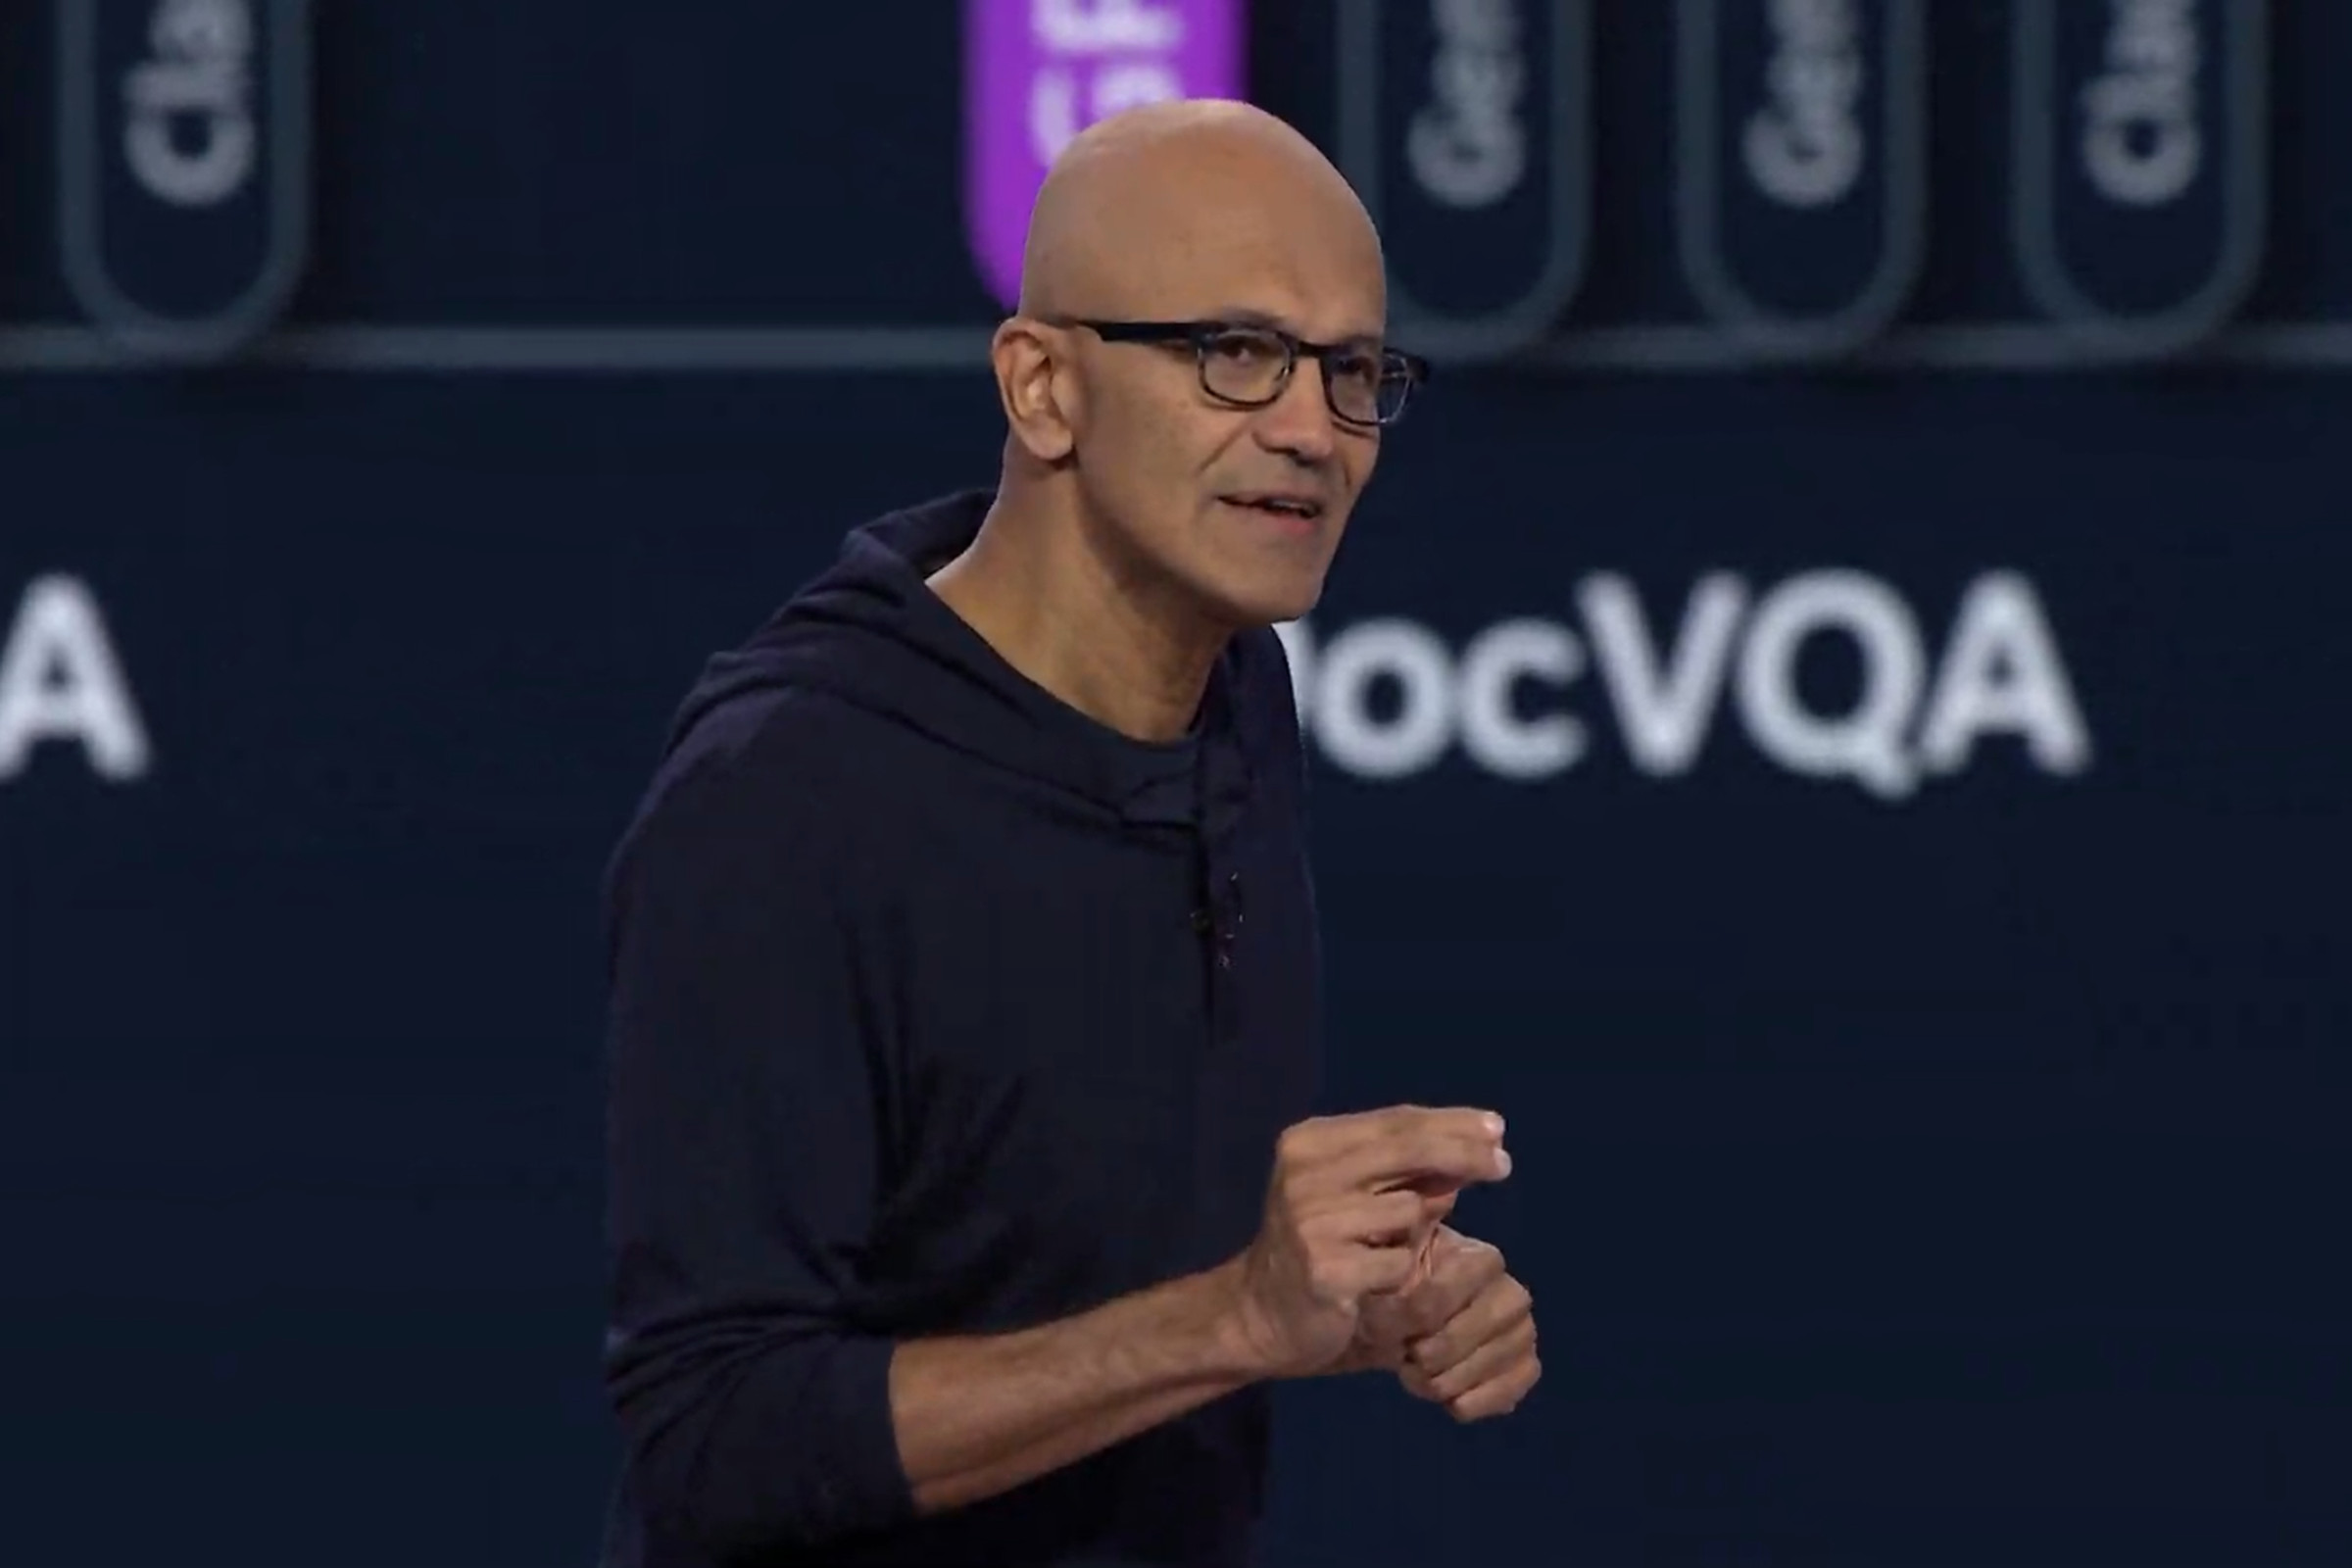 A picture of Microsoft CEO Satya Nadella speaking.